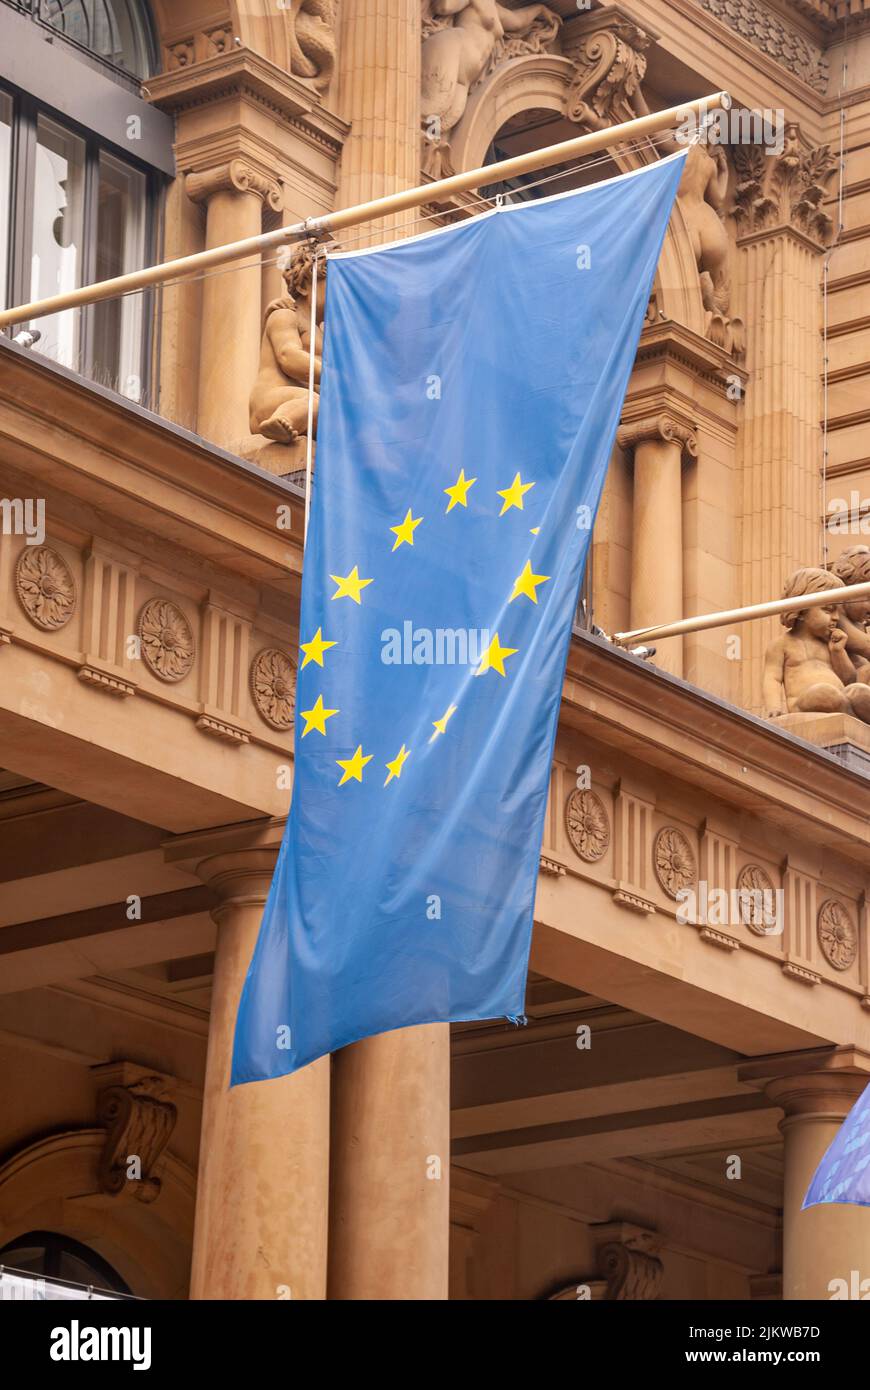 A Euriopean Union flag hanging on a building of Stock exchange i Frankfurt Stock Photo